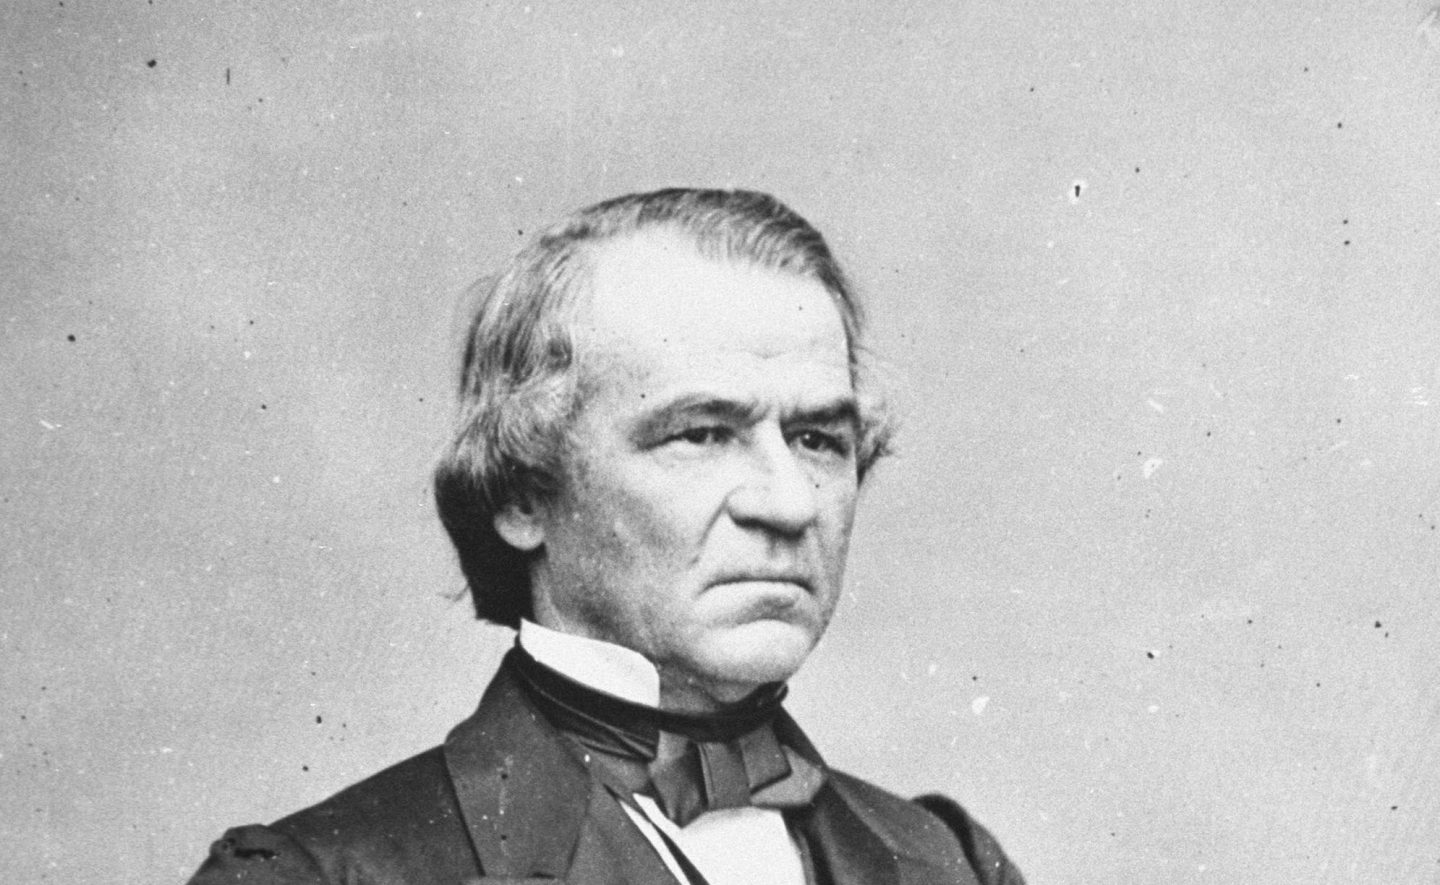 President Andrew Johnson, who assumed the office after Abraham Lincoln's assassination in 1865. (Getty Images)